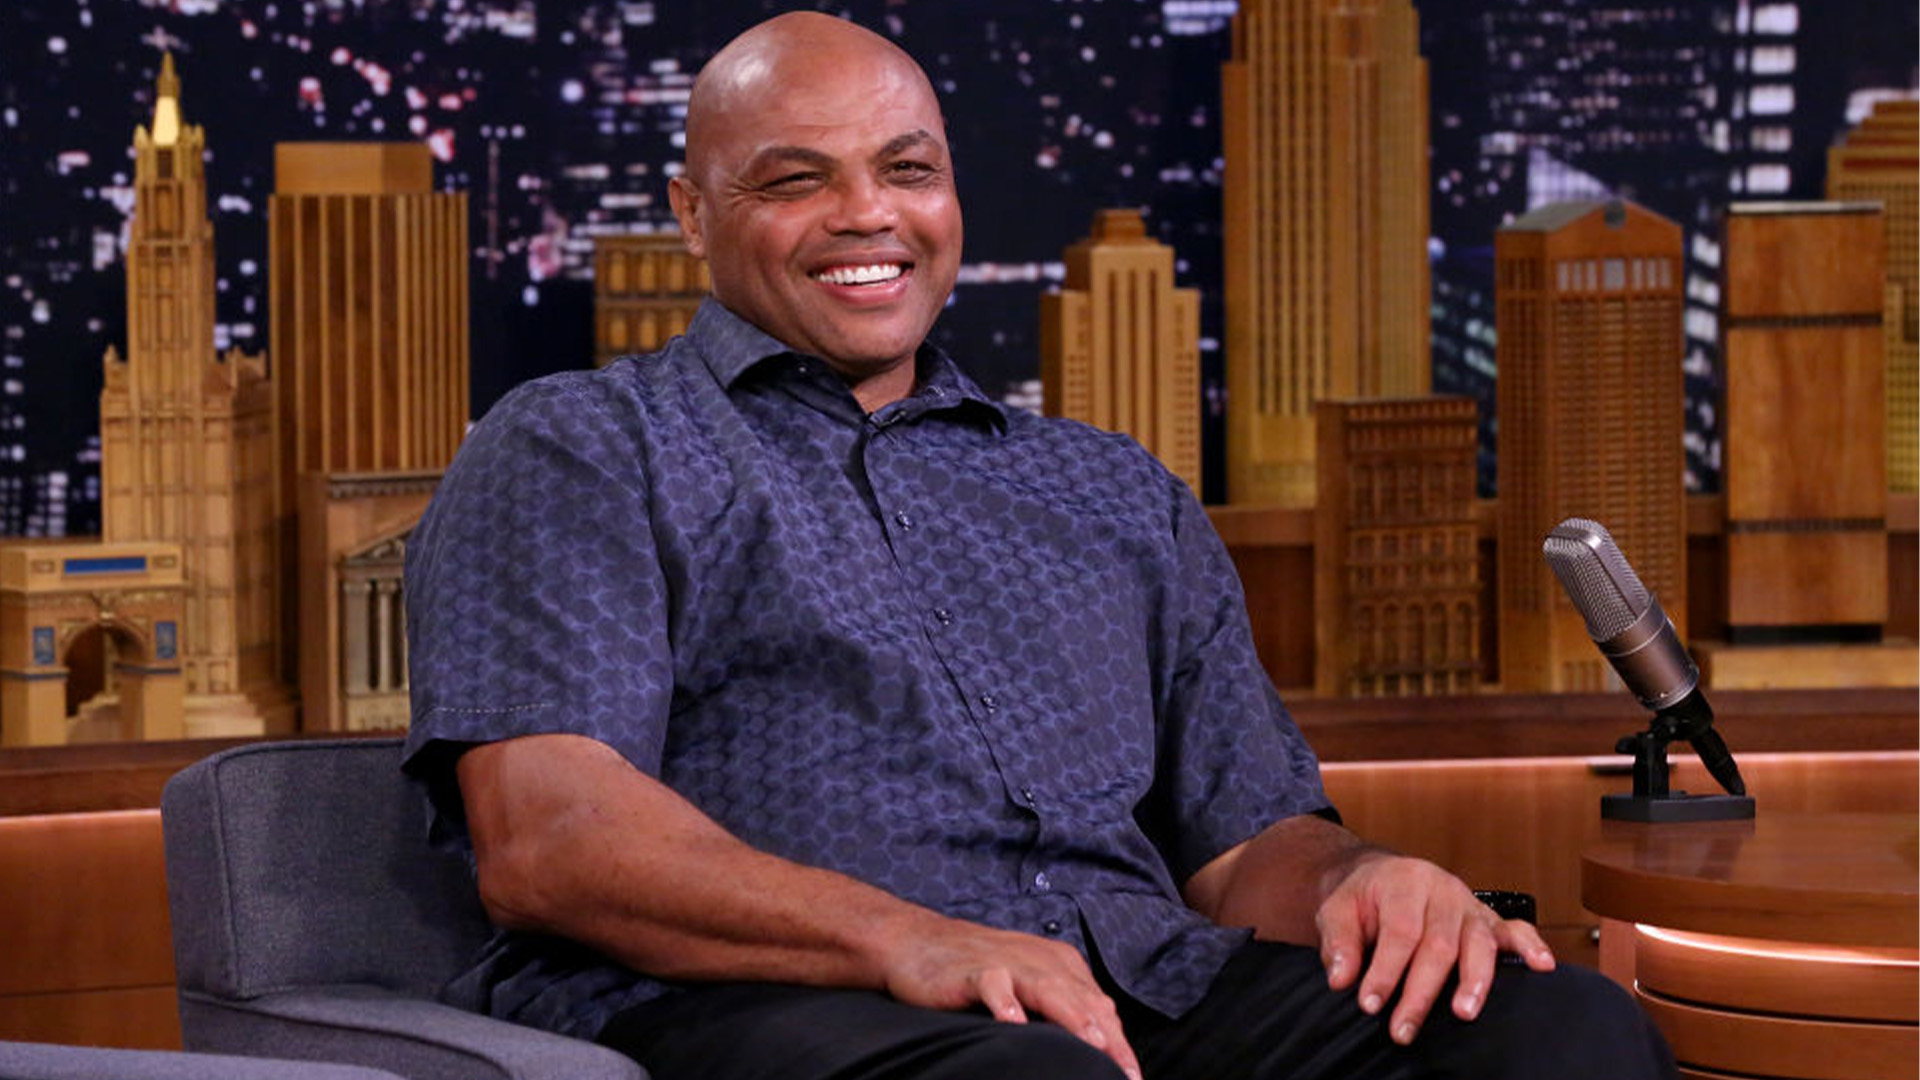 Charles Barkley To Donate $5M To Black Students At His Alma Mater Auburn University After SCOTUS' Affirmative Action Ruling